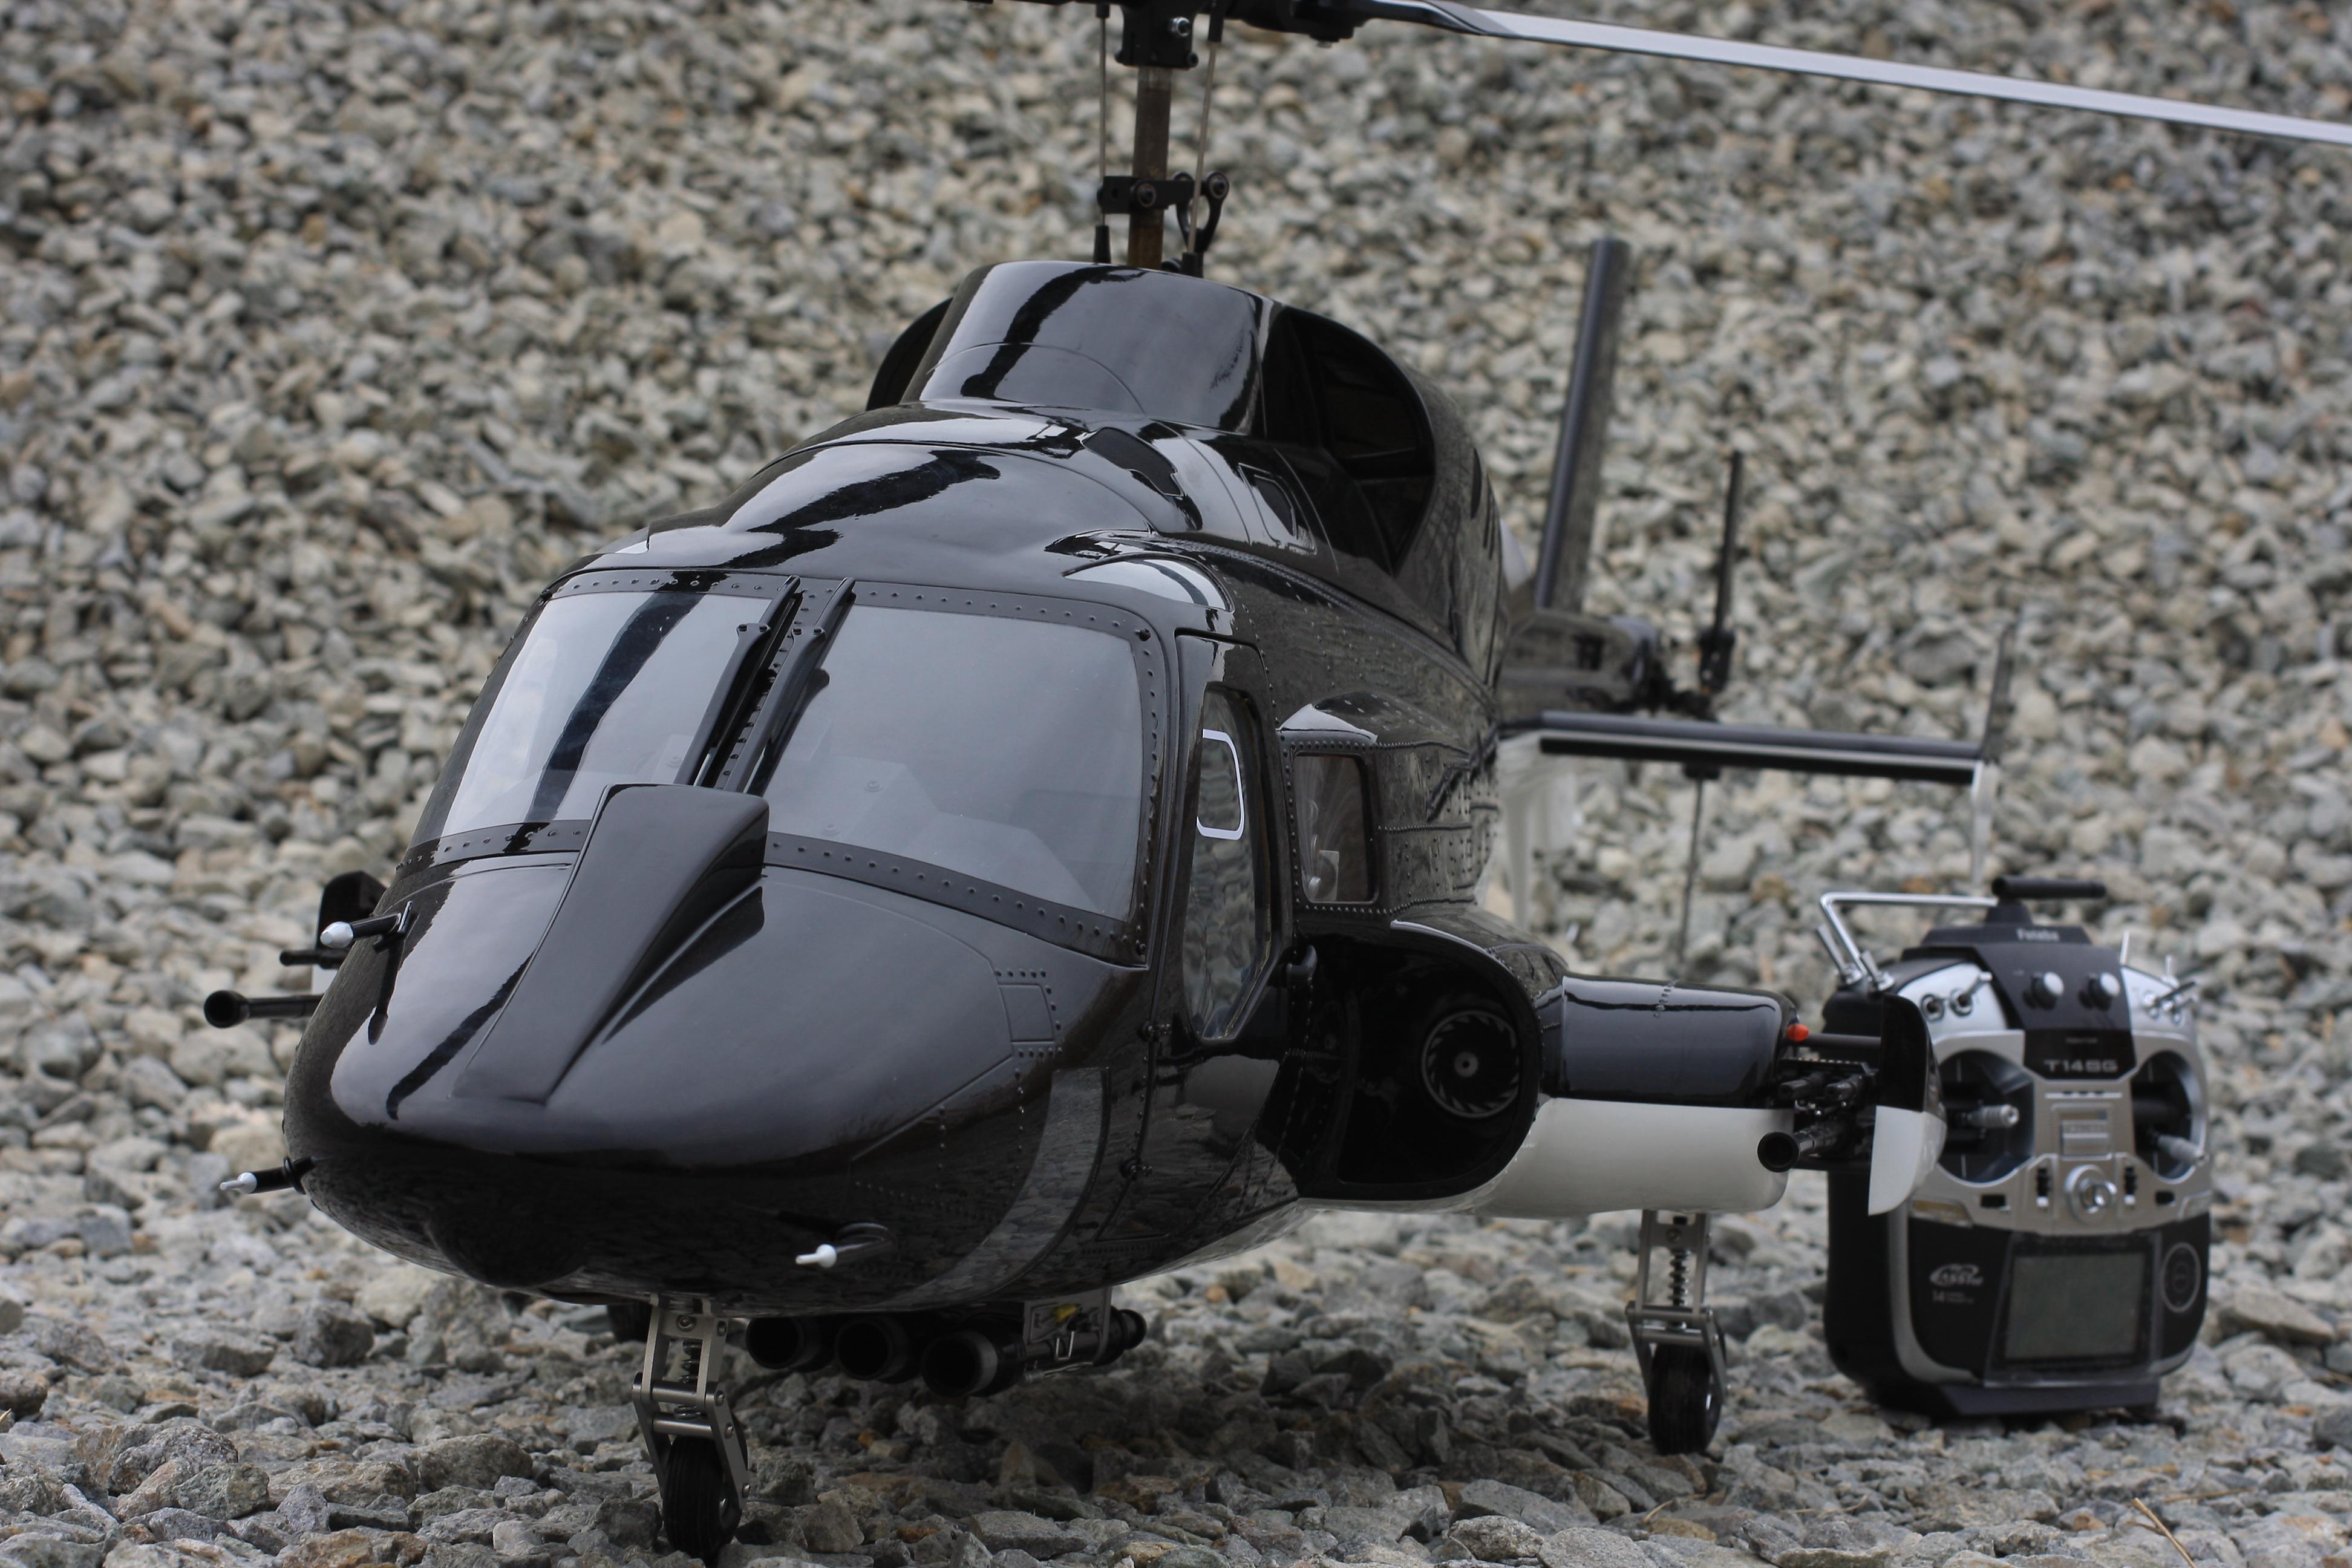 Airwolf Black Bell 222 Price: Finding the Right Price for an Airwolf Black Bell 222